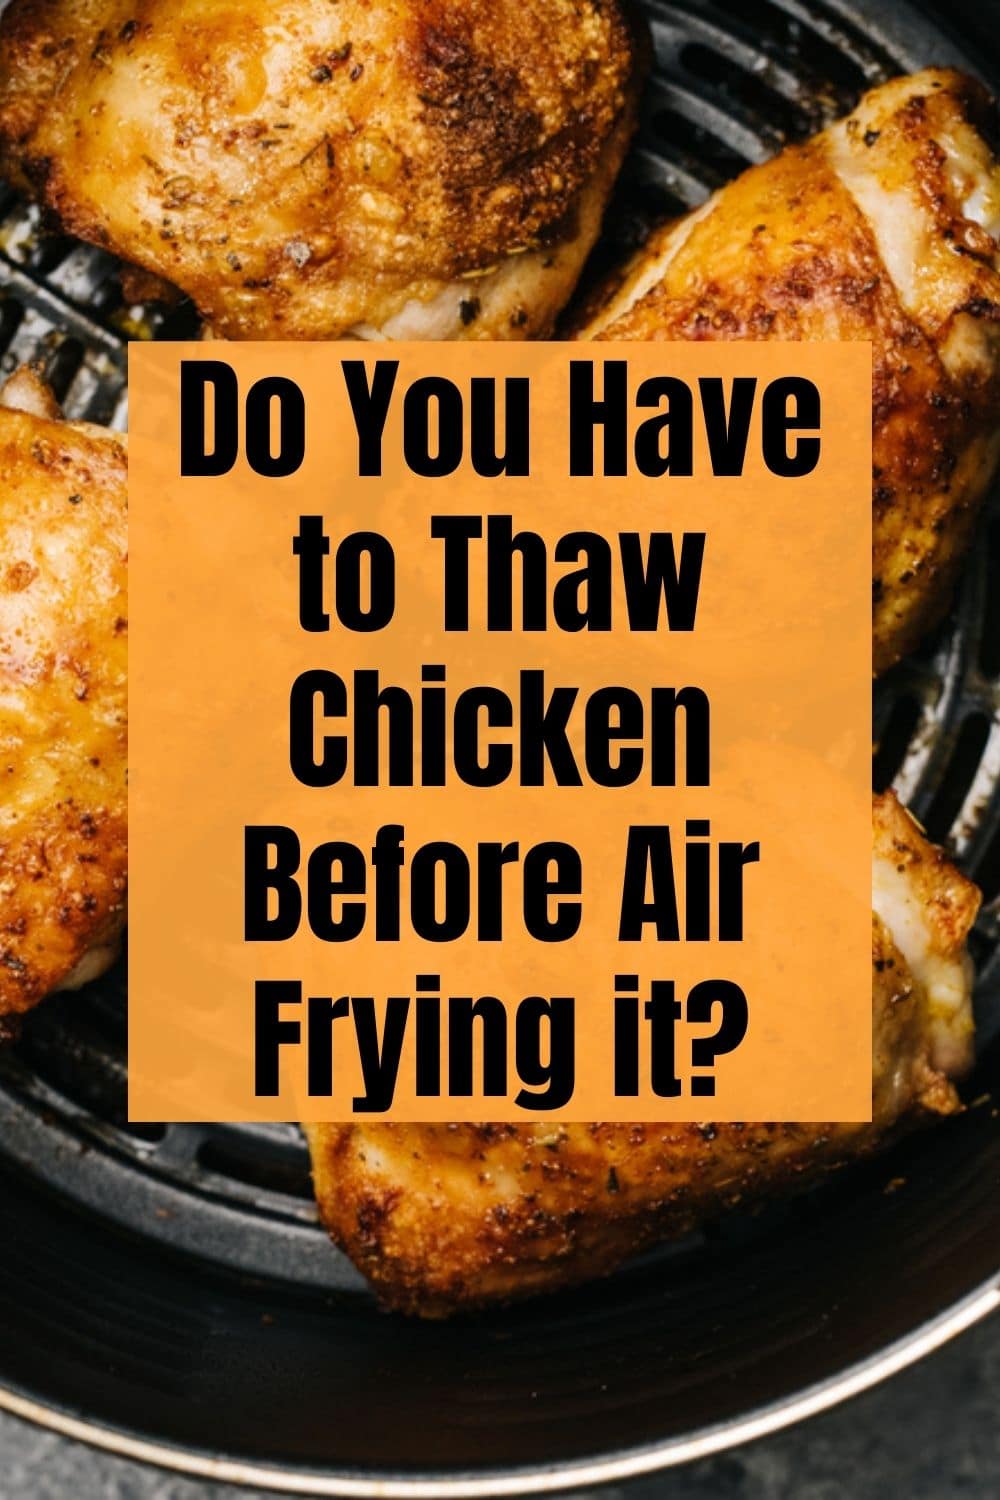 Do You Have to Thaw Chicken Before Air Frying?